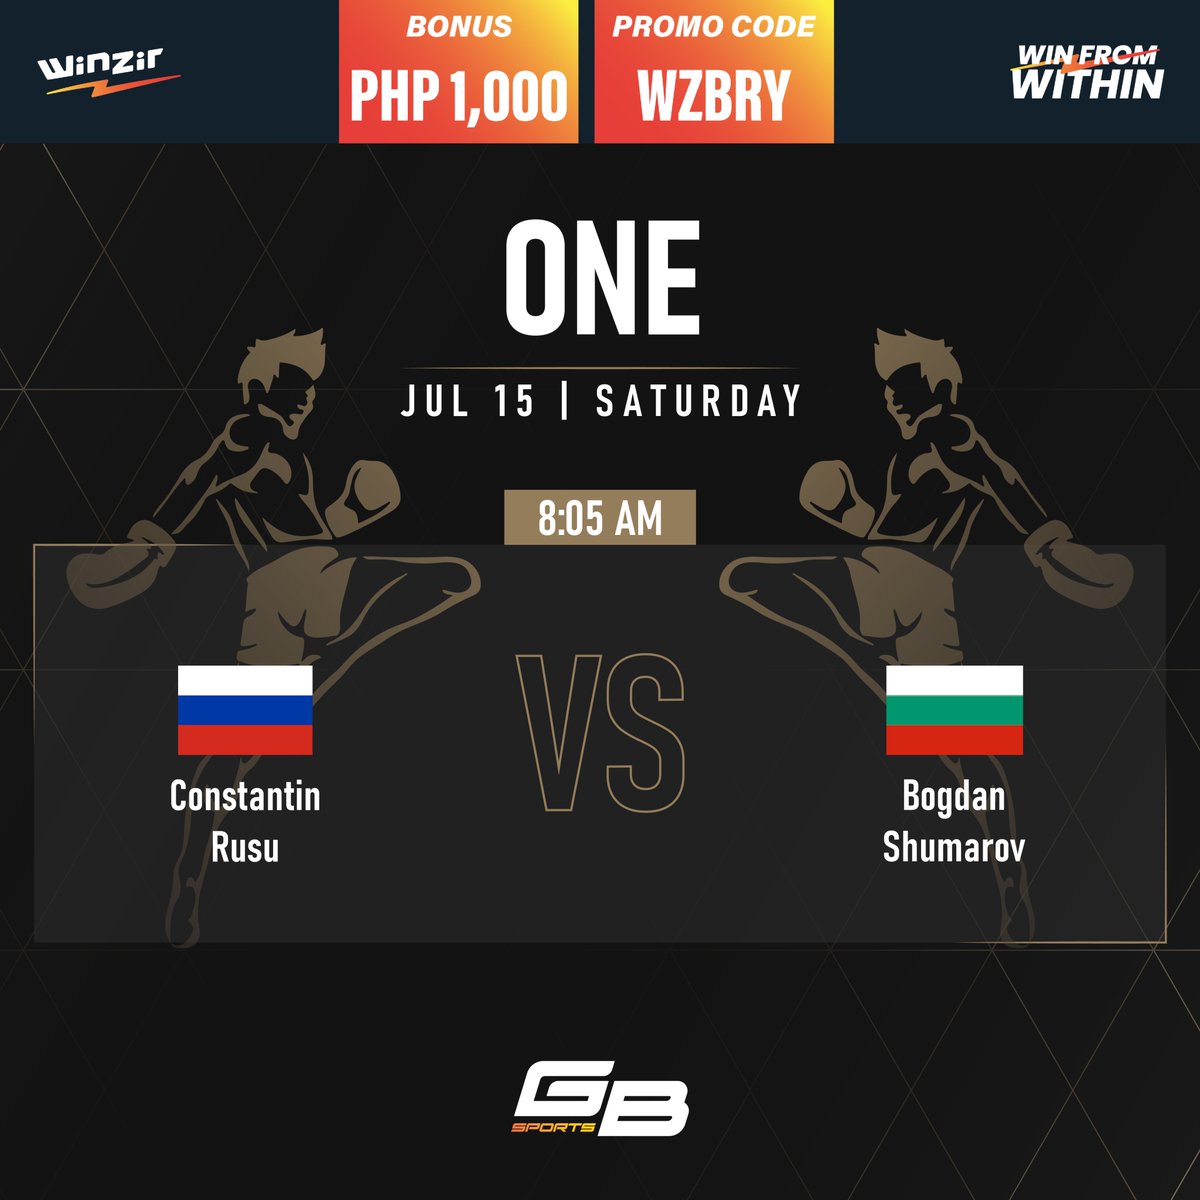 ONE Fight Night: Rusu vs. Shumarov. Who will emerge as the champion?

Register using promo code WZBRY or referral link : https://t.co/GDNPWVSwhz

#winzir #sportsbook #onechampionship #mma #ufc #WinFromWithin #keepitfun #gameresponsibly #responsiblegaming https://t.co/Q8UKTCp5Xd